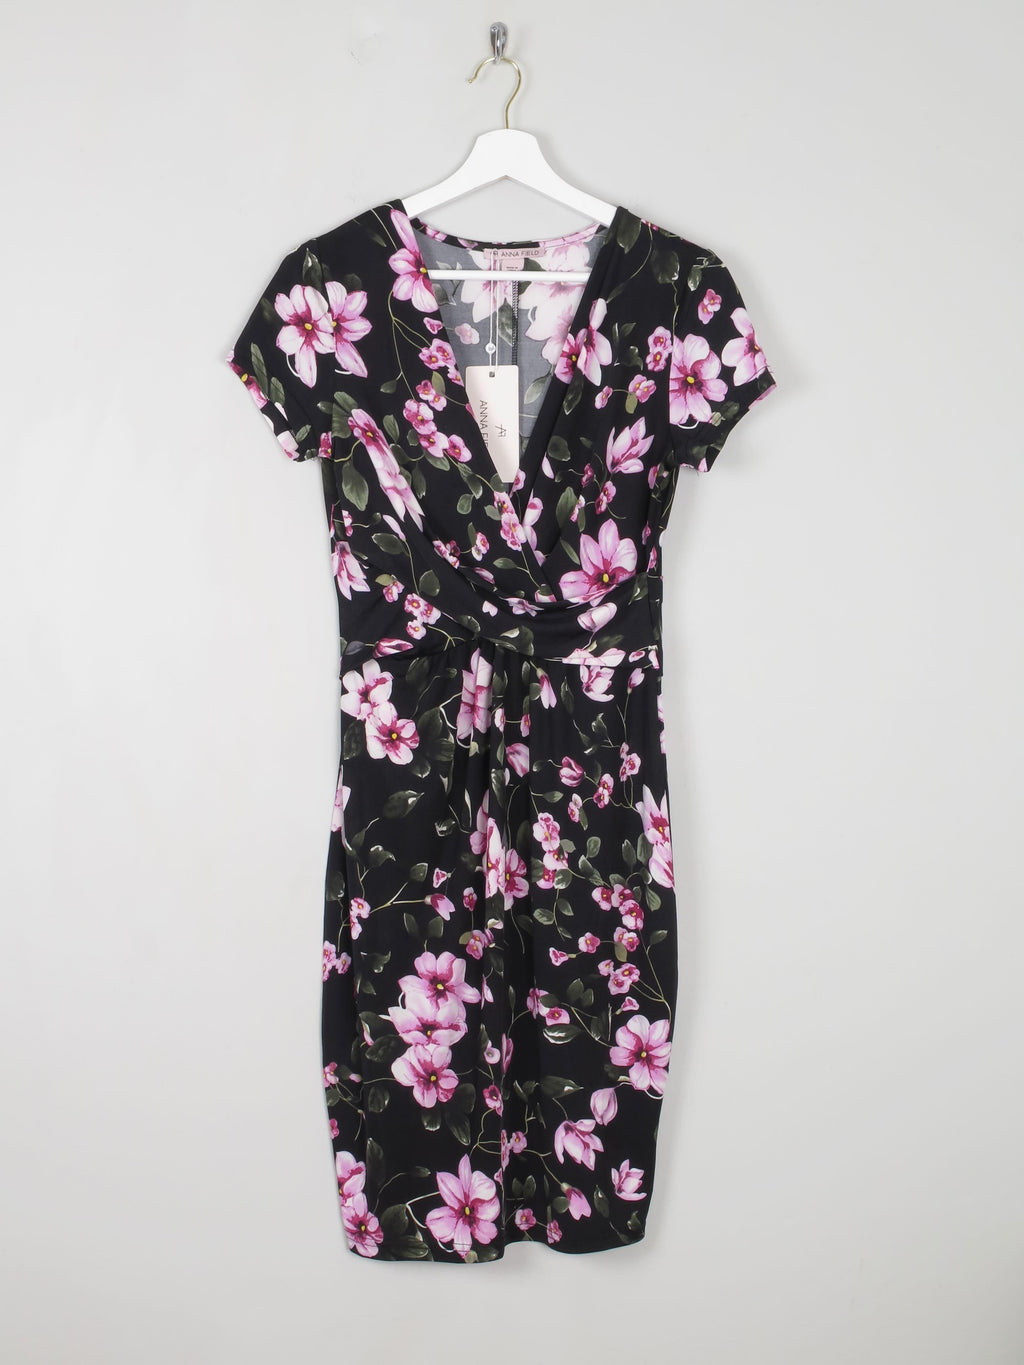 Floral Fitted Anna field Dress 8/XS - The Harlequin